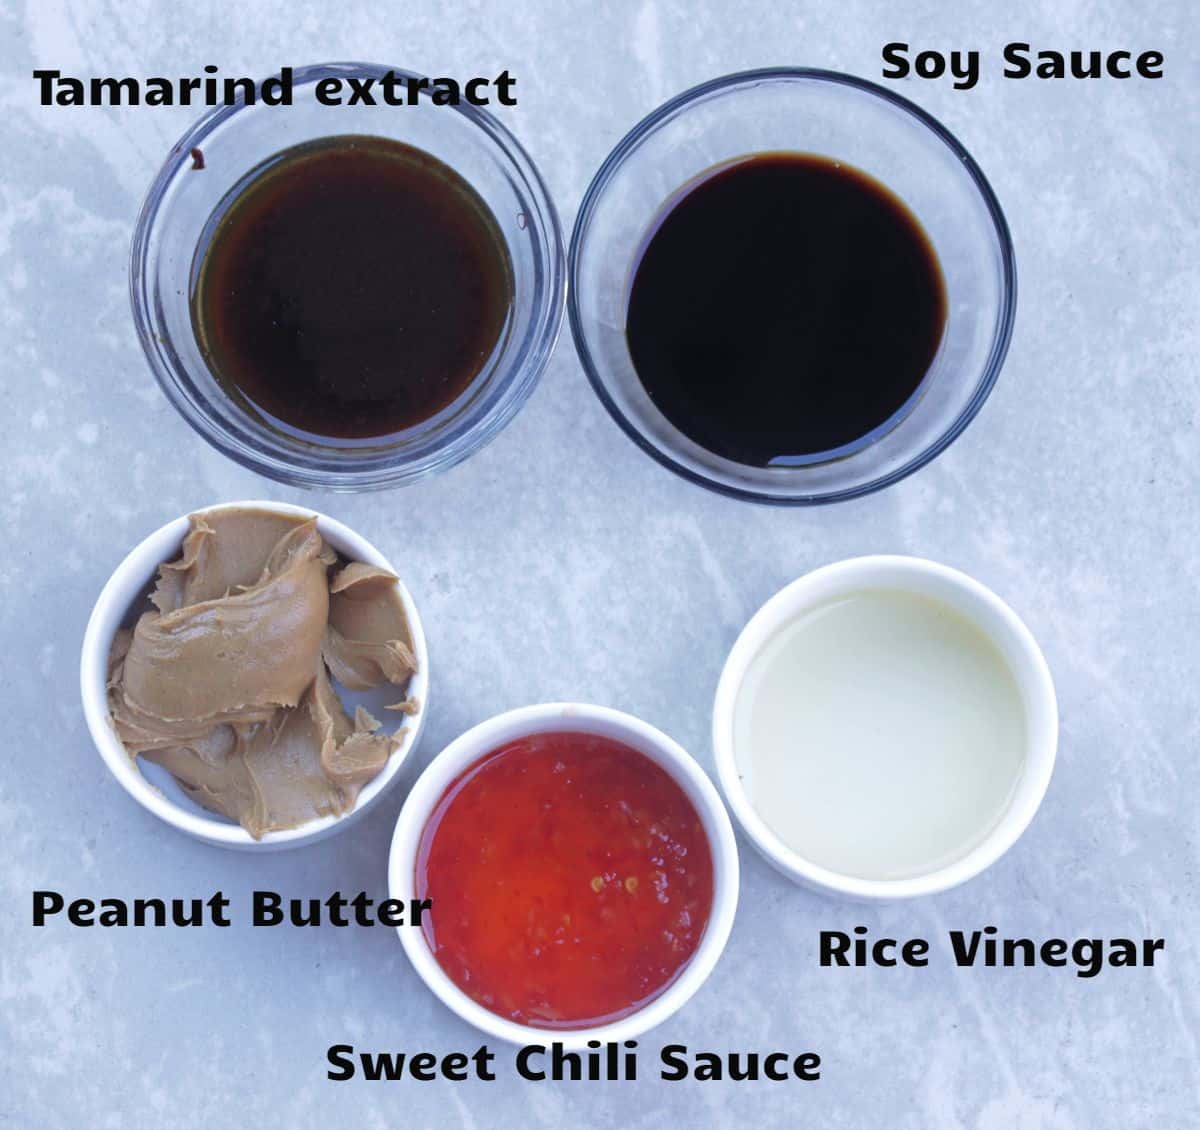 Ingredients needed to make spicy Thai sauce